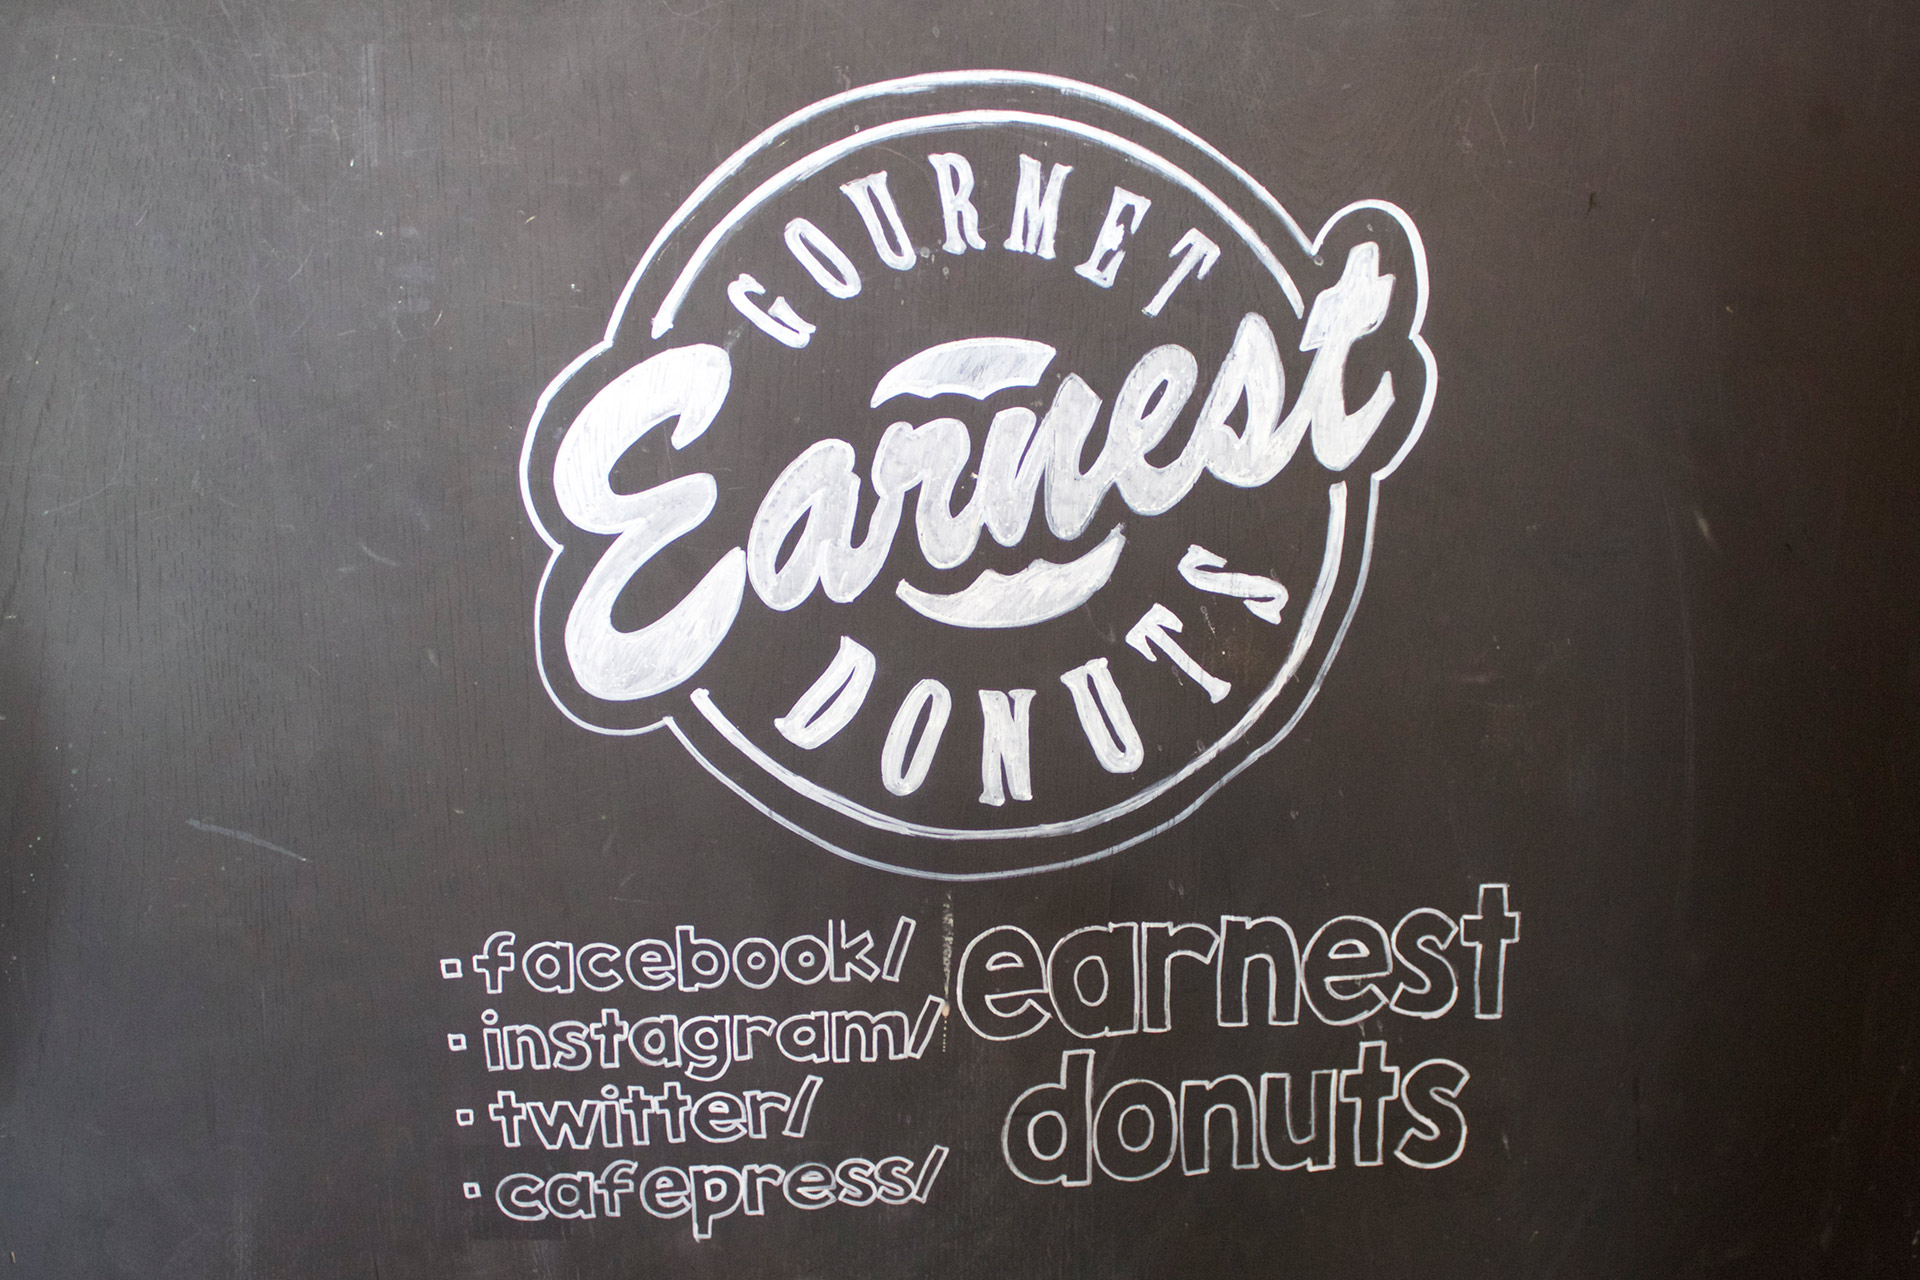 Earnest Donuts Review